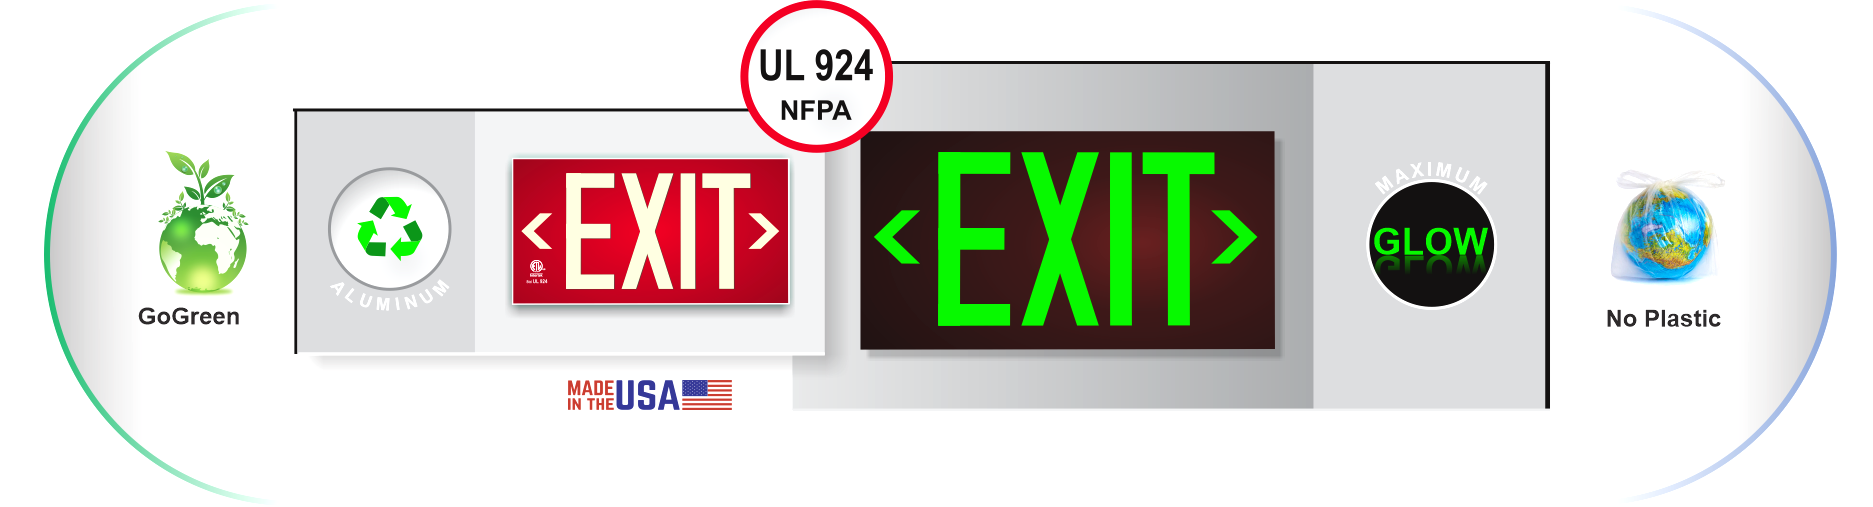 Photoluminescent Exit Signs UL 924 Go Green Glow